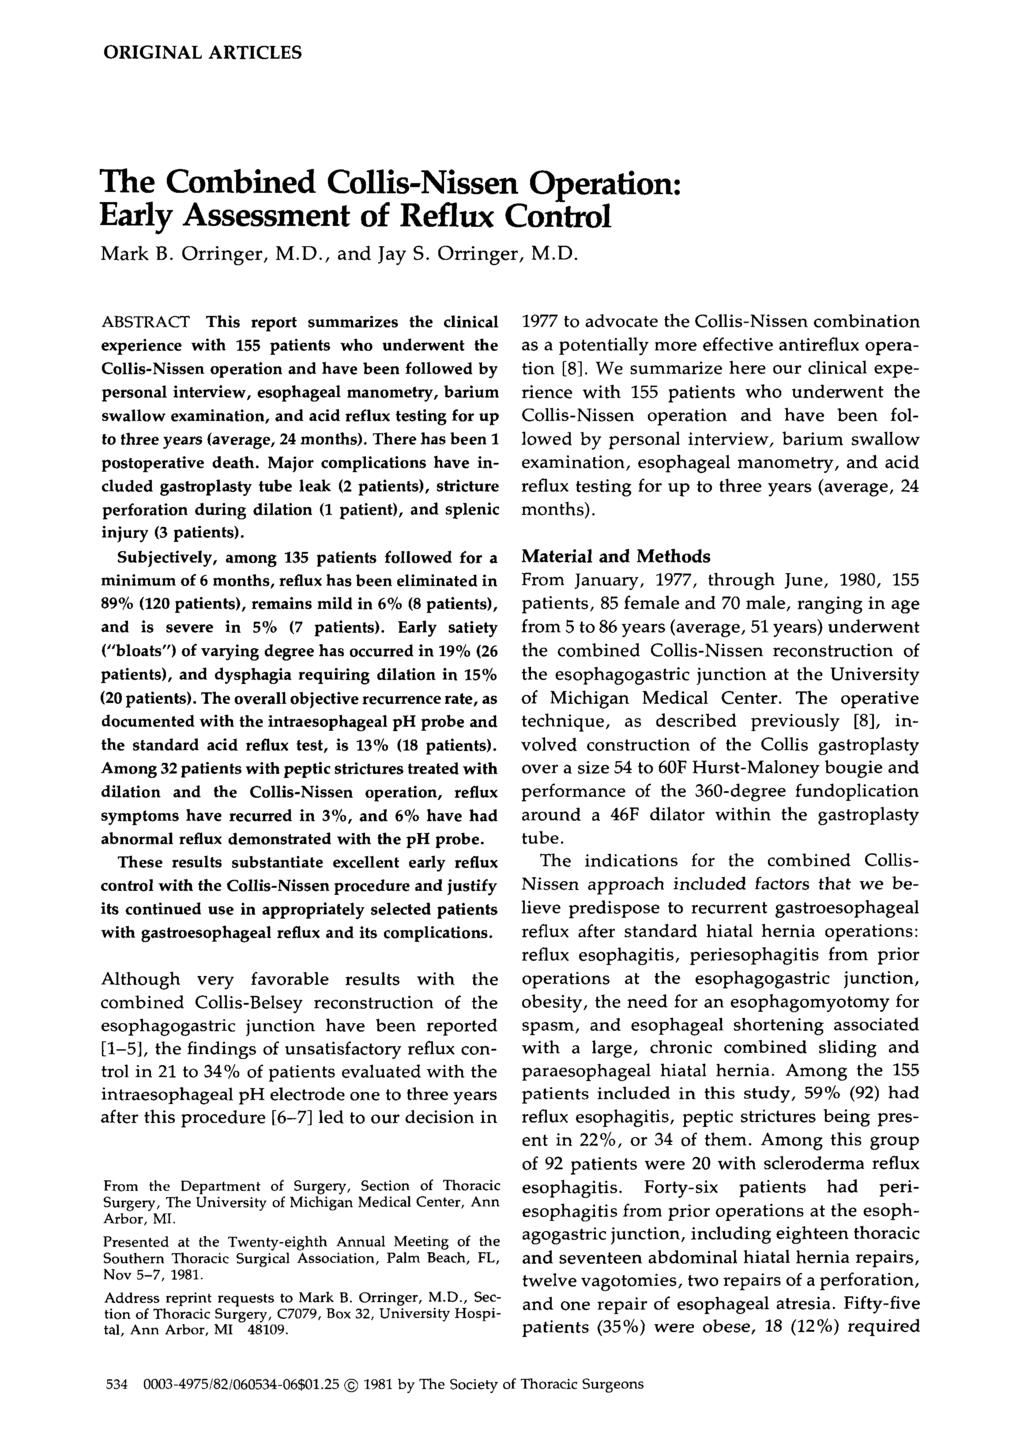 ORIGINAL ARTICLES The Combined Collis-Nissen Operation: Early Assessment of Reflwx Control Mark B. Orringer, M.D.